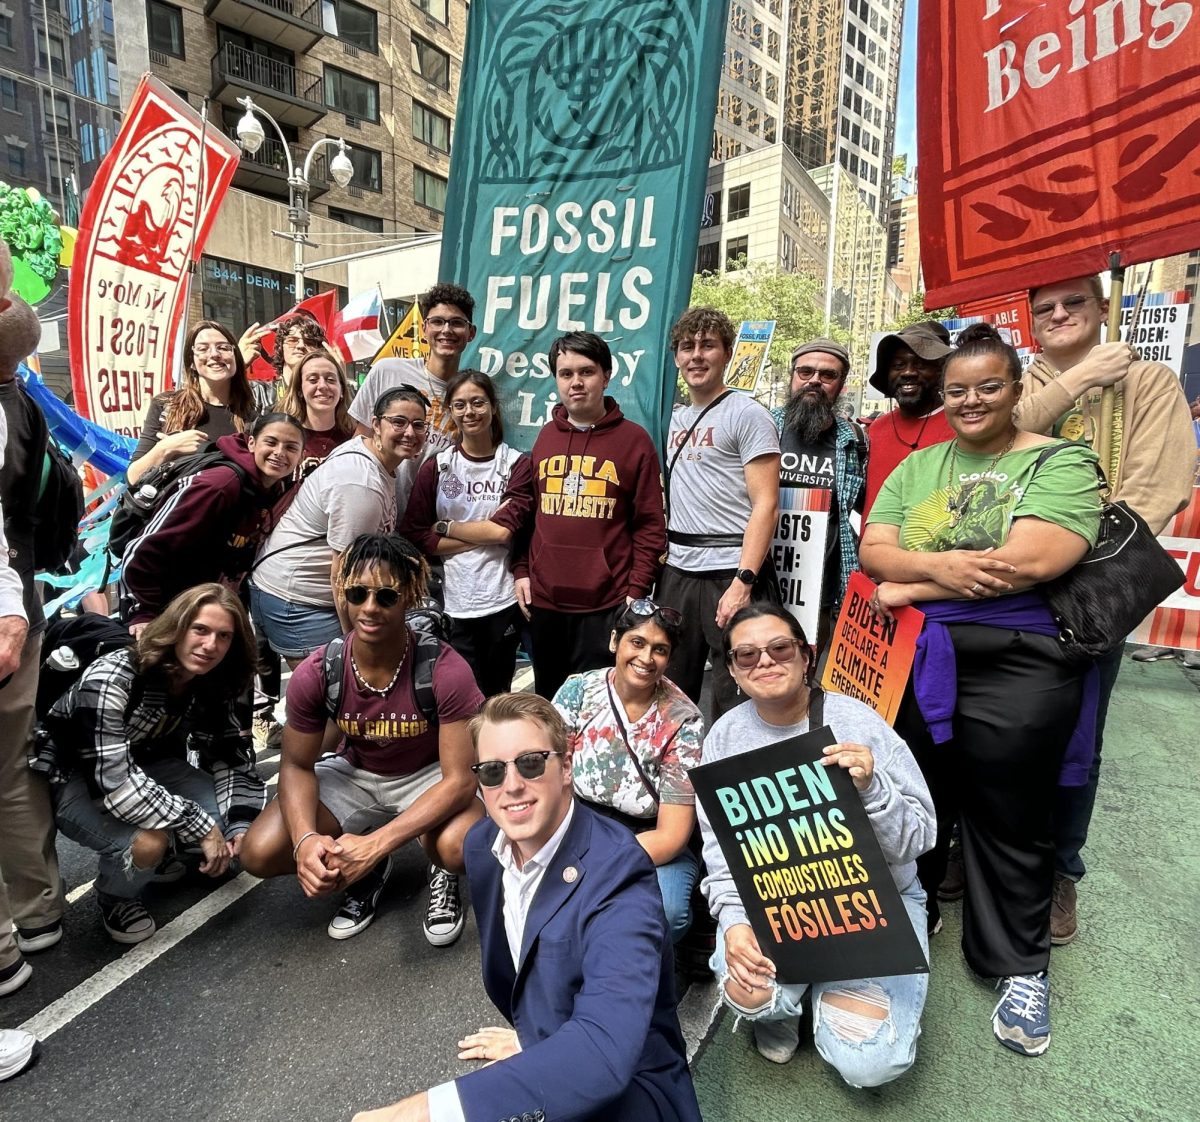 Iona attends march against fossil fuels ahead of UN Summit.